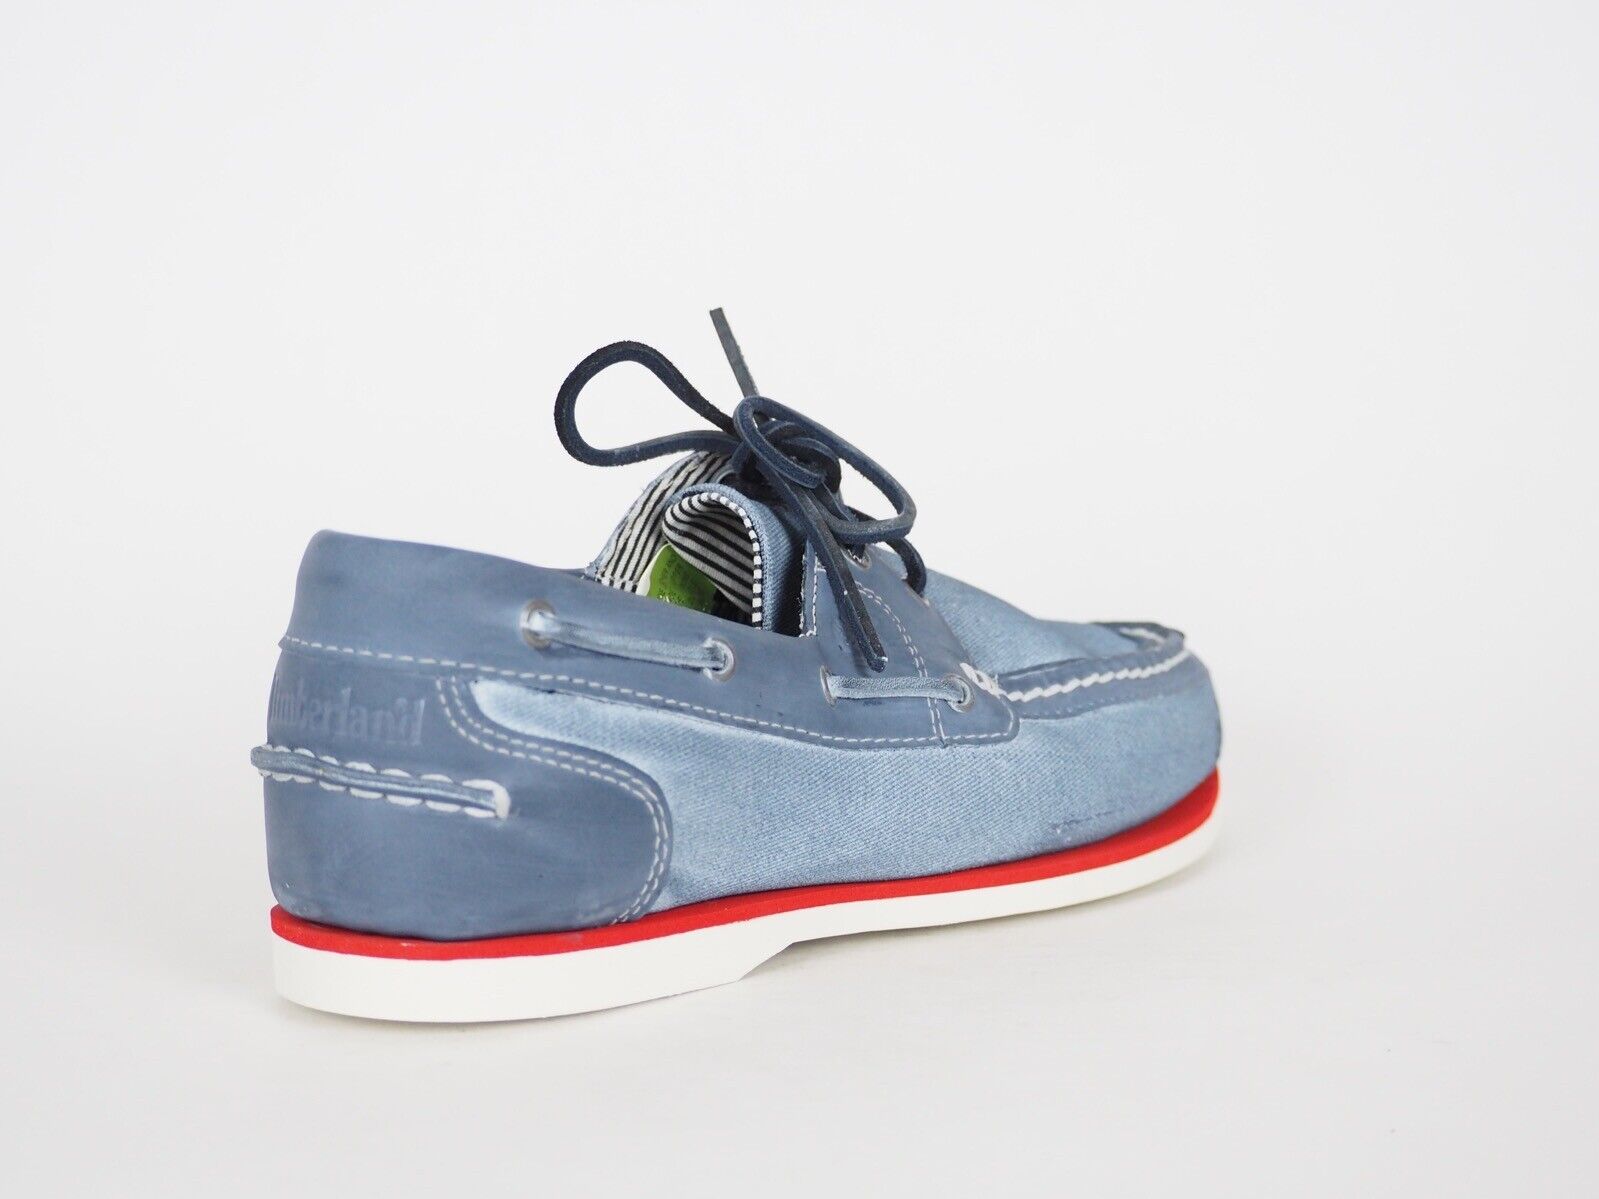 Womens Timberland Amherst 24675 Navy Leather Fabric Boat Shoes - London Top Style